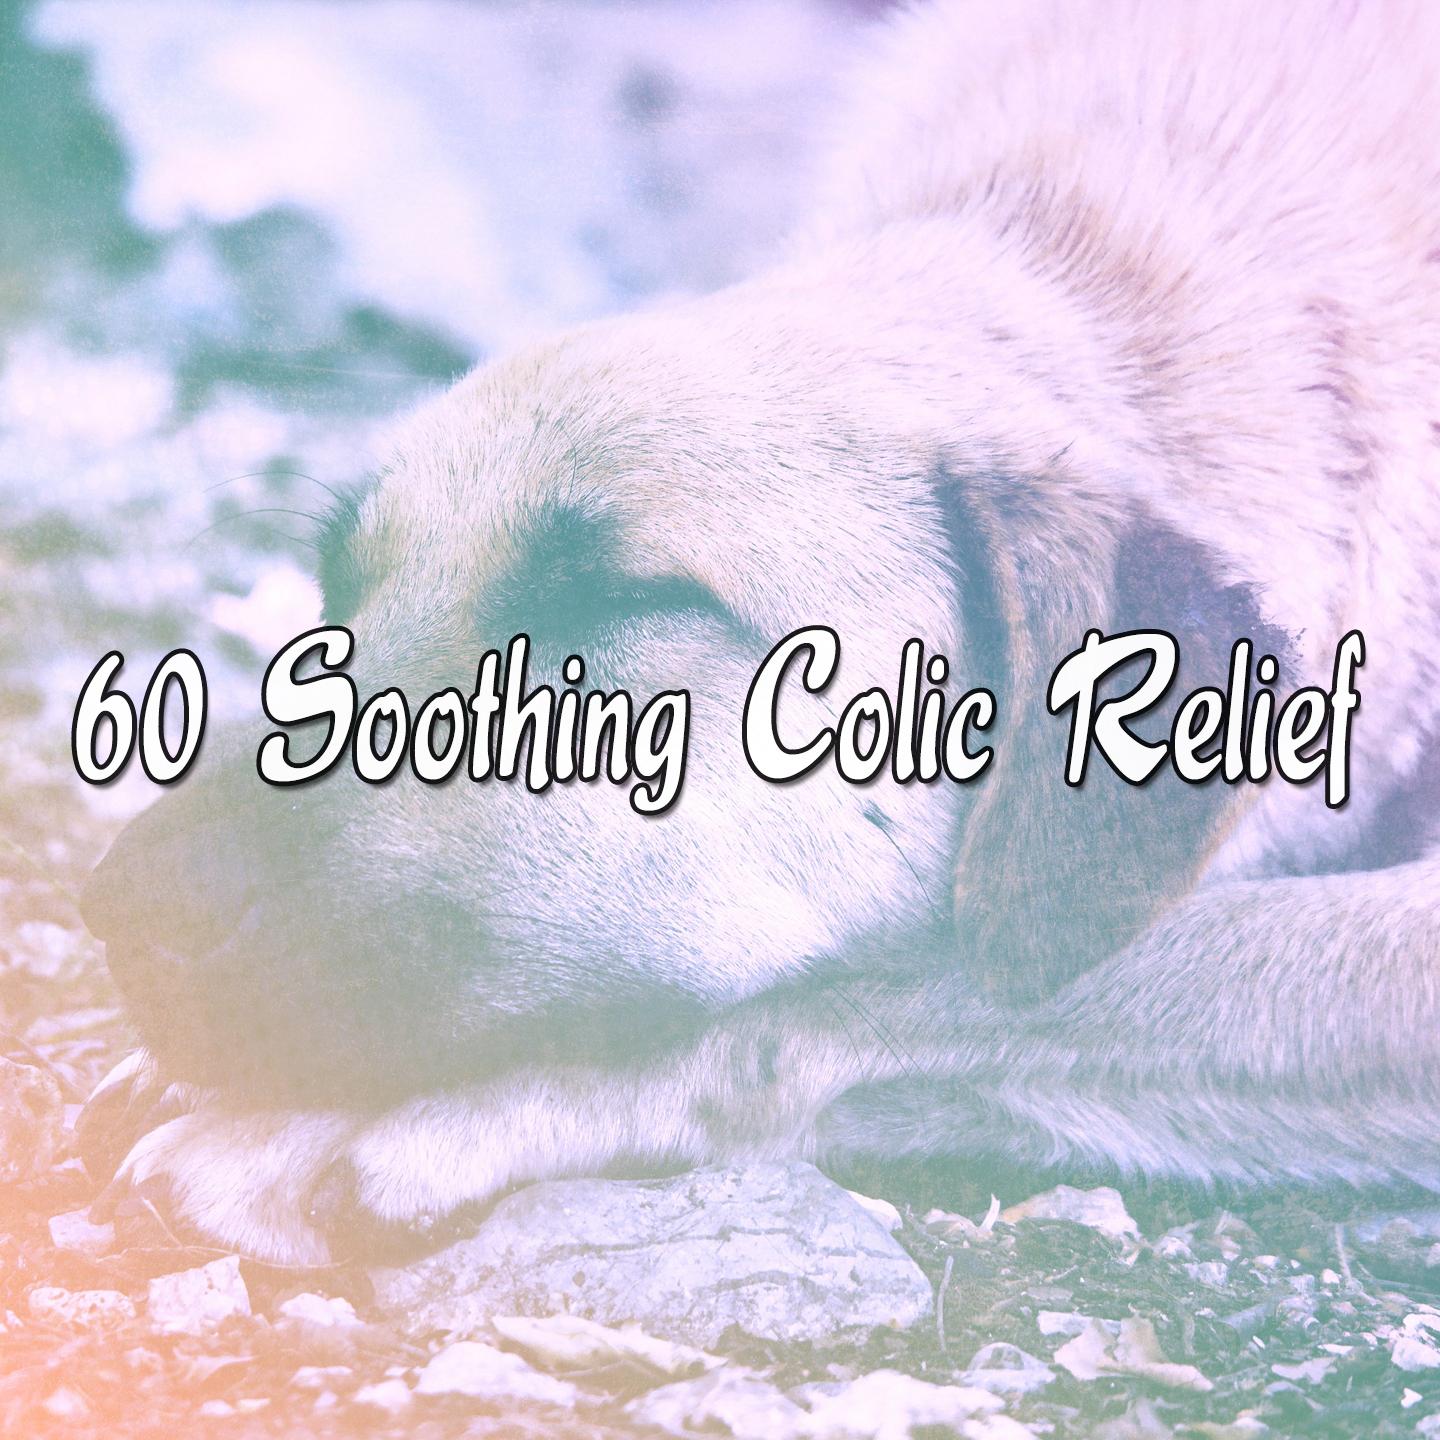 60 Soothing Colic Relief